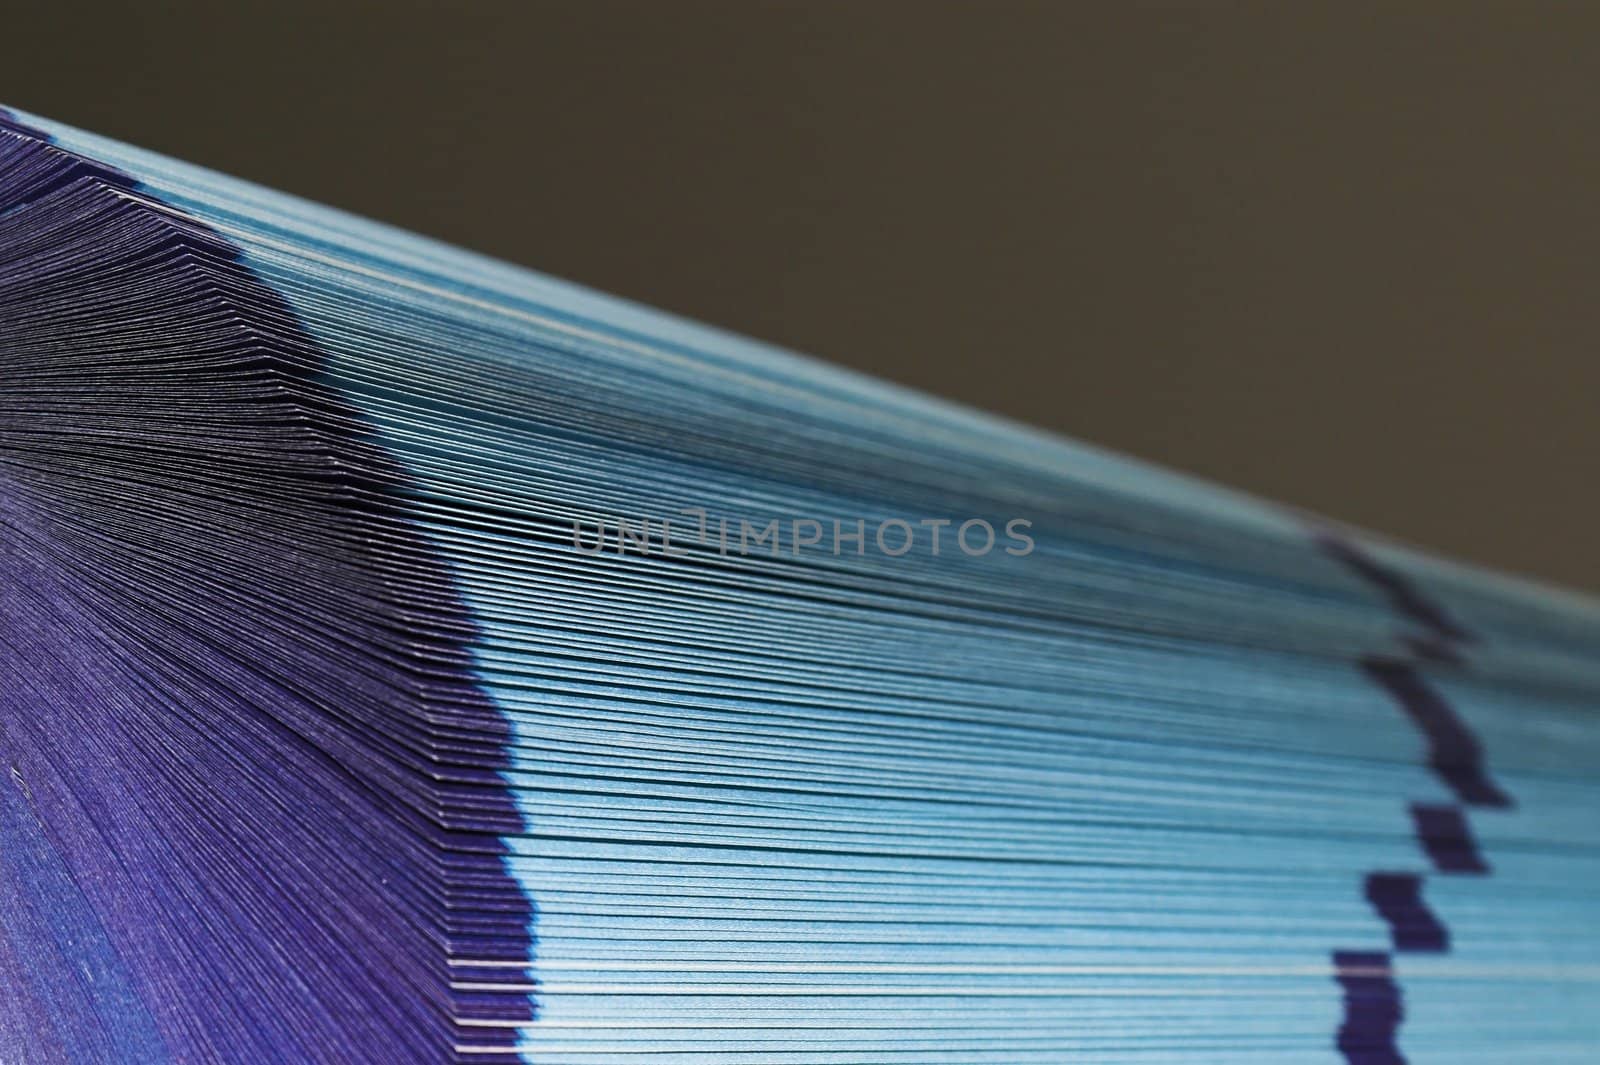 The cutting face of a phone directory with fanned pages.